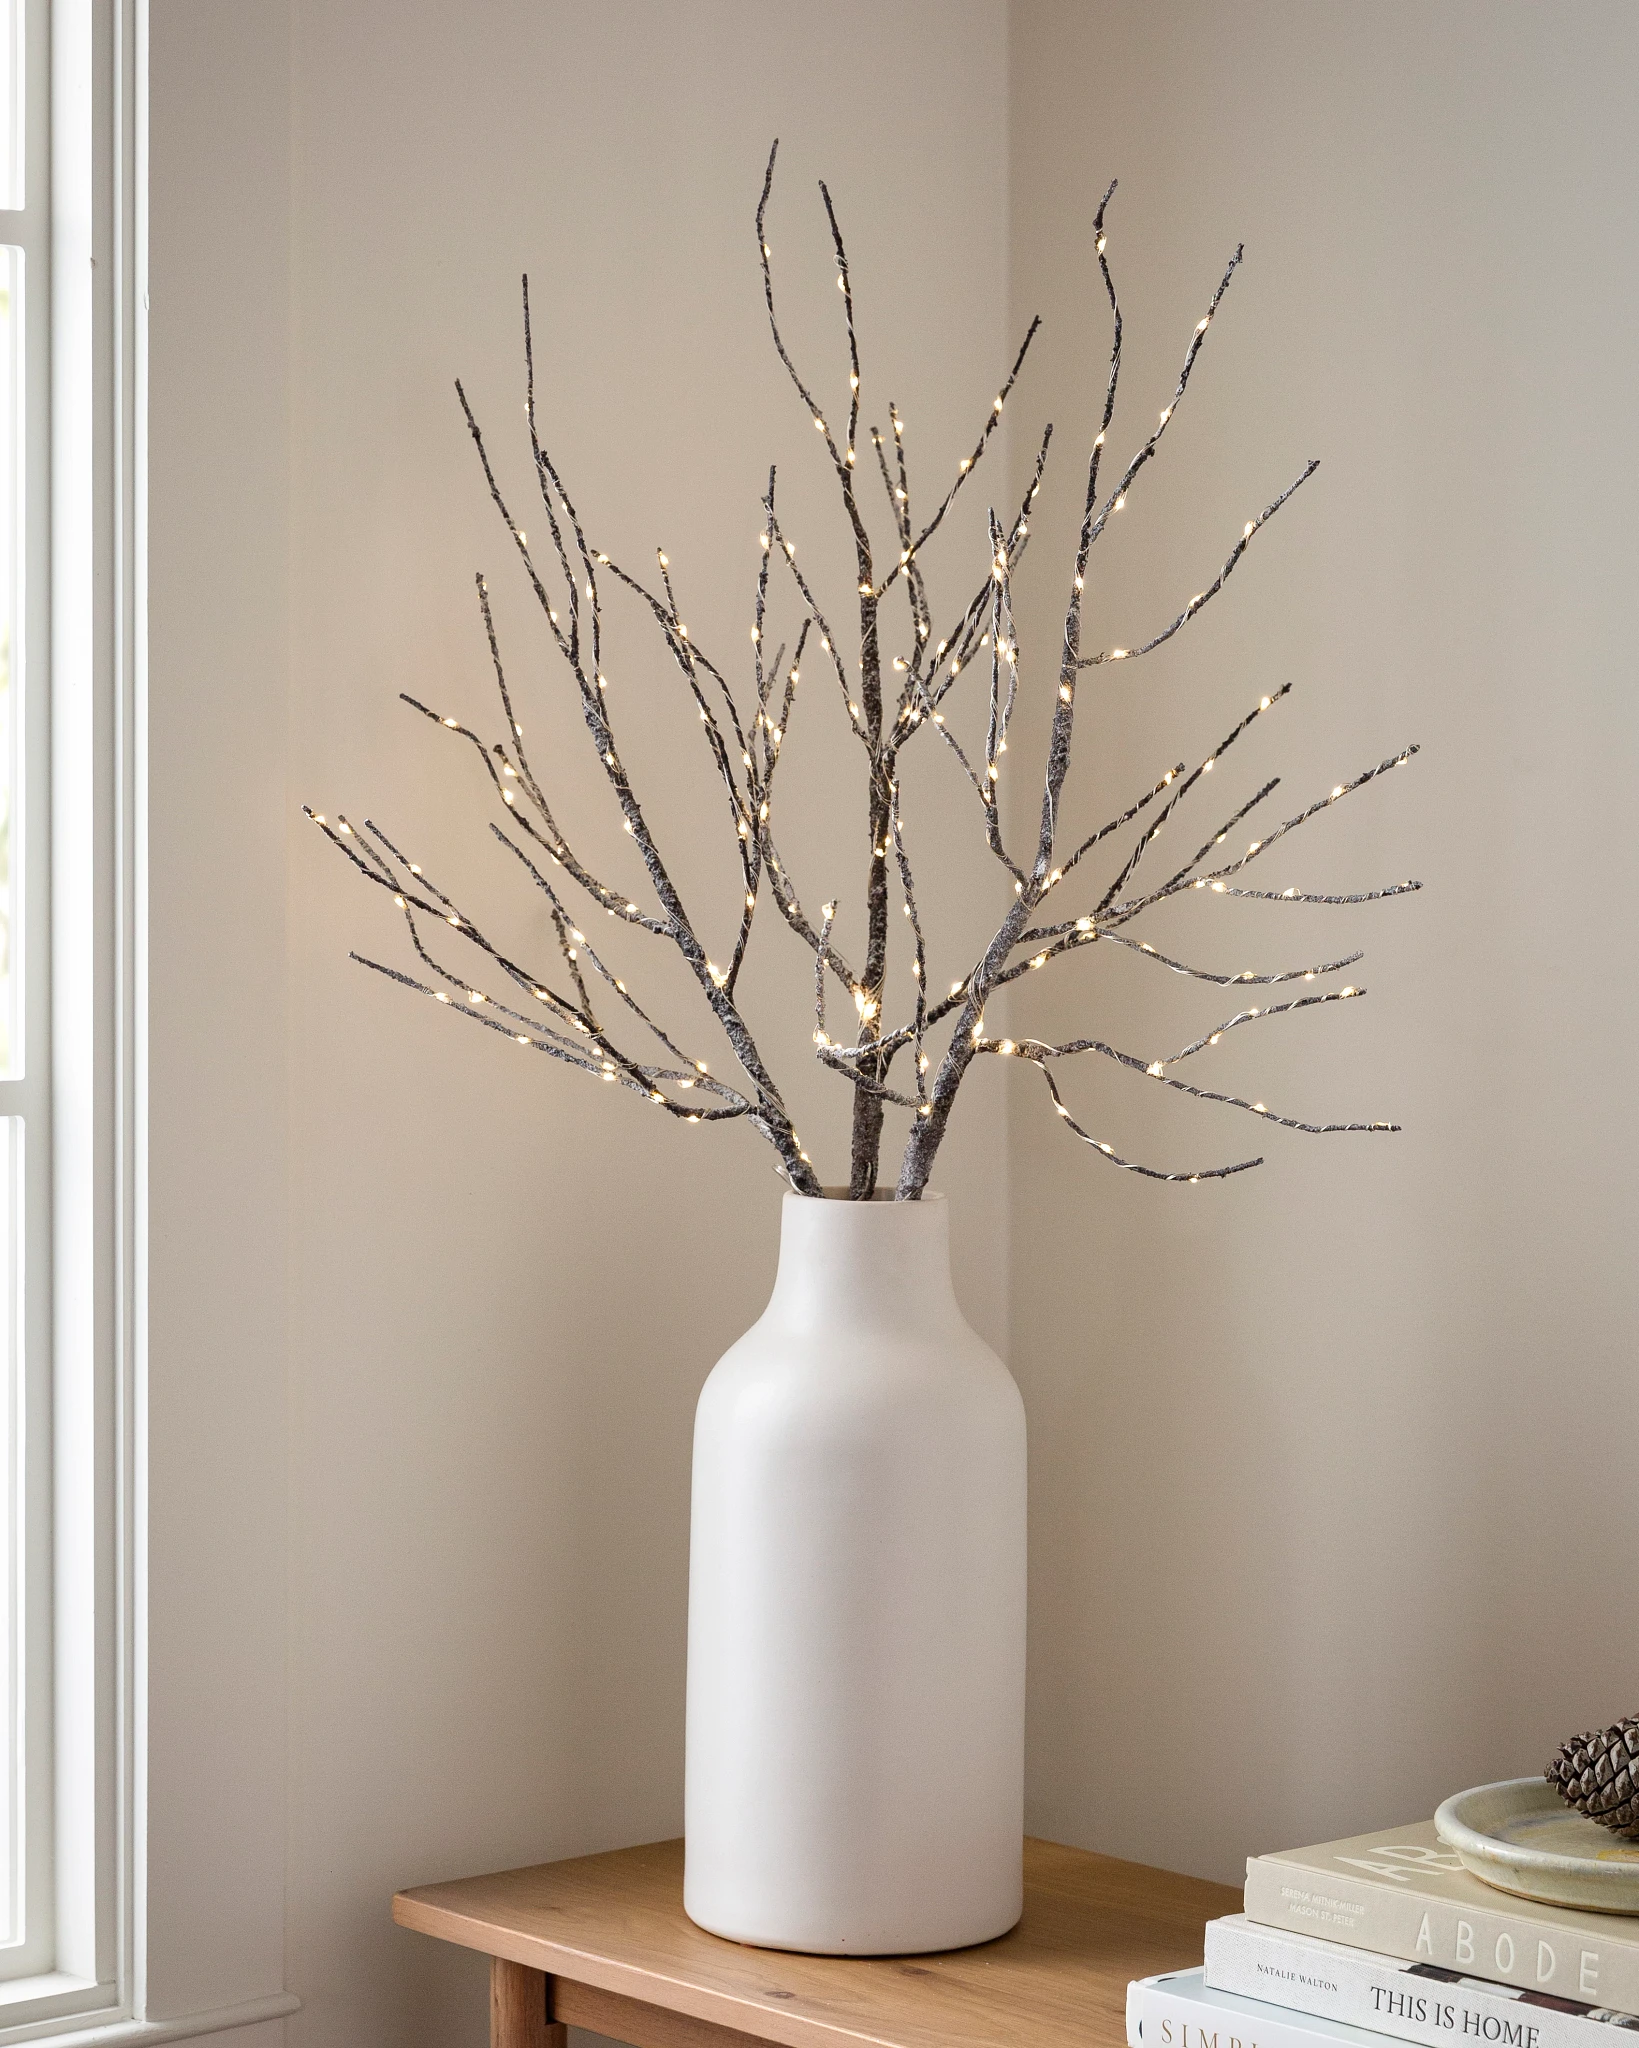 4ft LED decorative tree | Five Below | let go & have fun